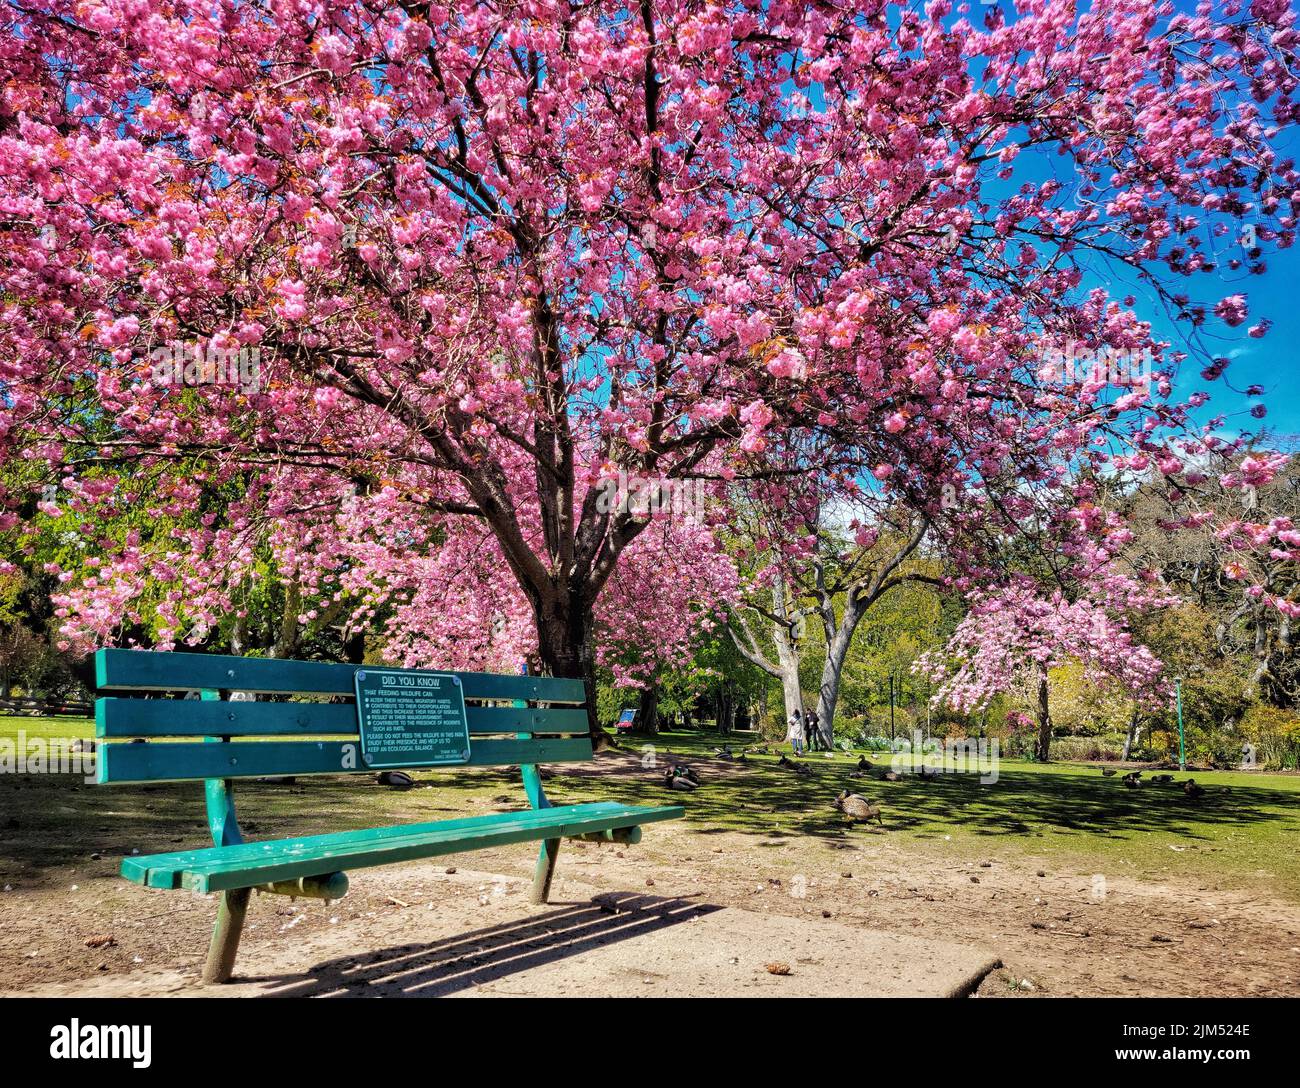 A beautiful shot of a wooden bench in front of a big cherry blossom tree on a sunny day at Beacon Hill Park, Victoria, British Columbia, Canada Stock Photo